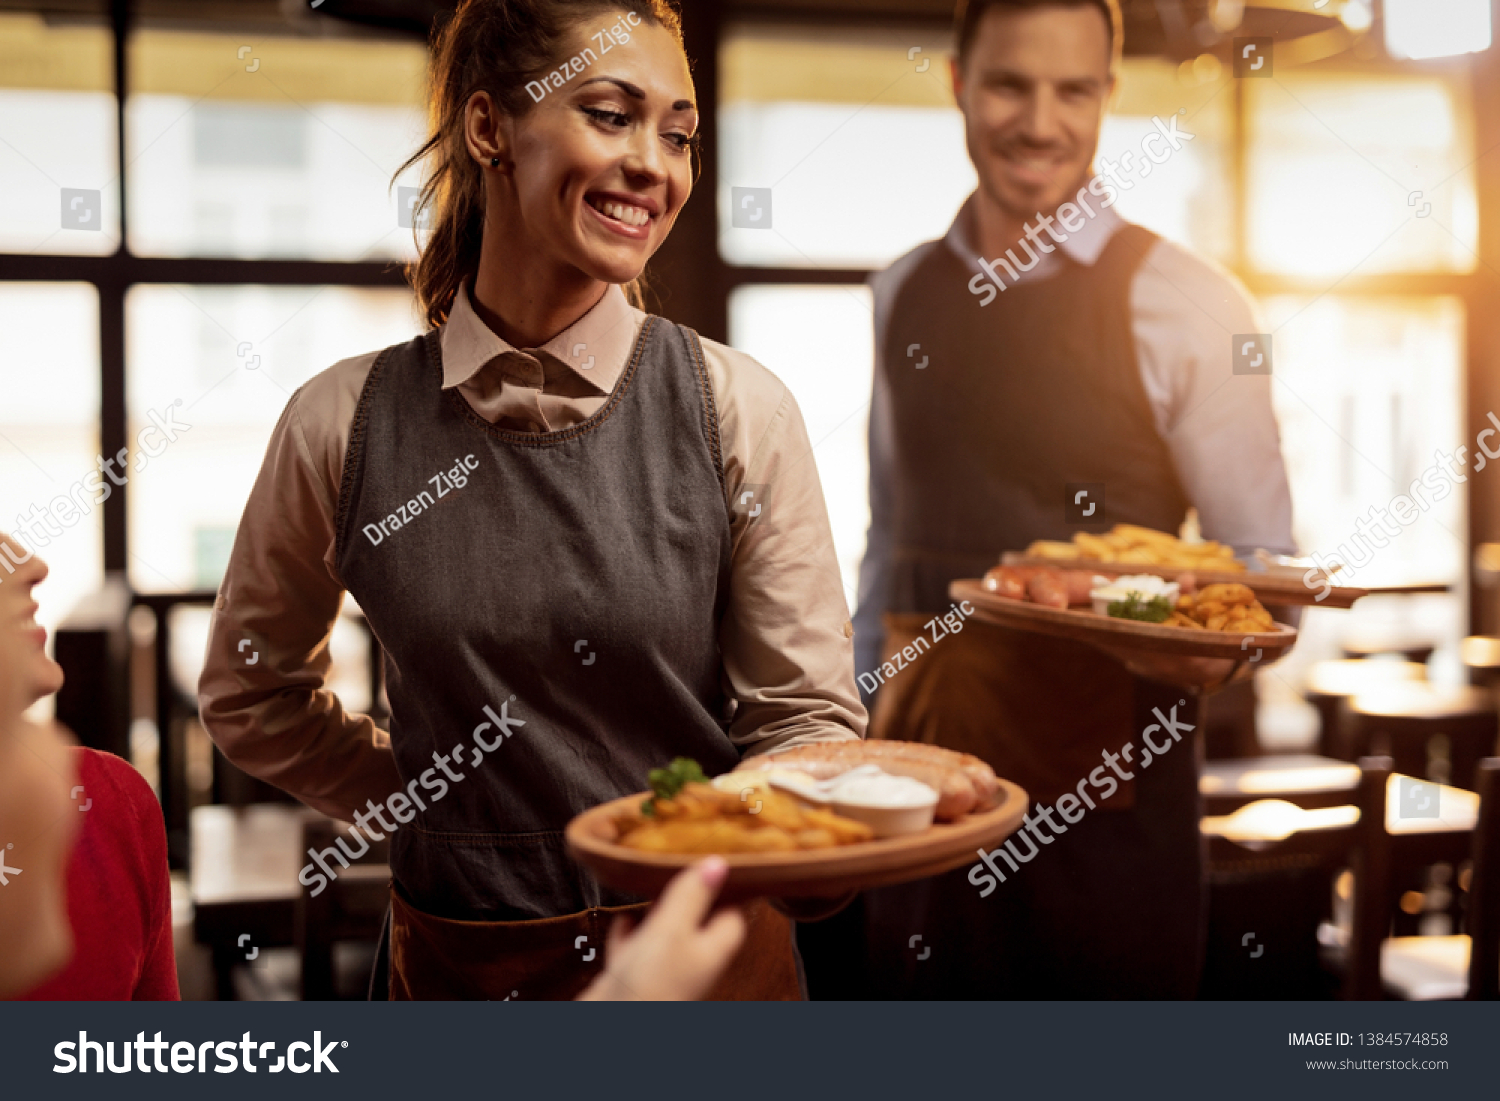 Two waiters serving lunch and brining food to their gusts in a tavern. Focus is on happy waitress.  #1384574858